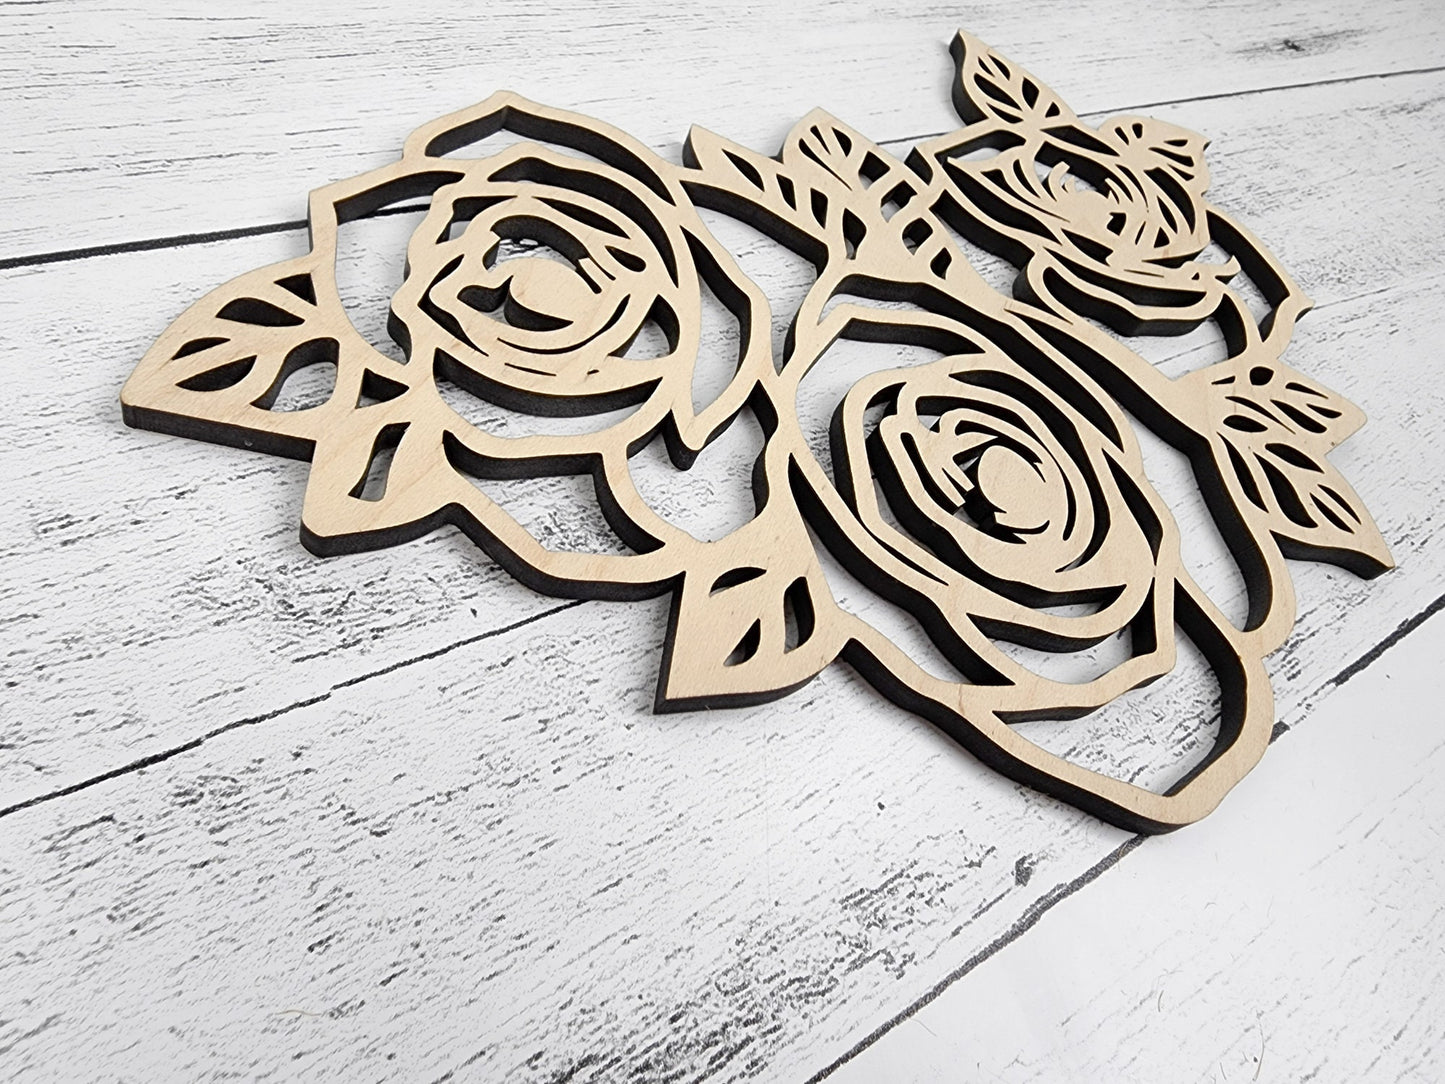 Wood Floral Rose Cut out, Flower shapes with leaves, Wooden floral pattern for signs, flowery blanks for crafts, unfinished DIY, sign making